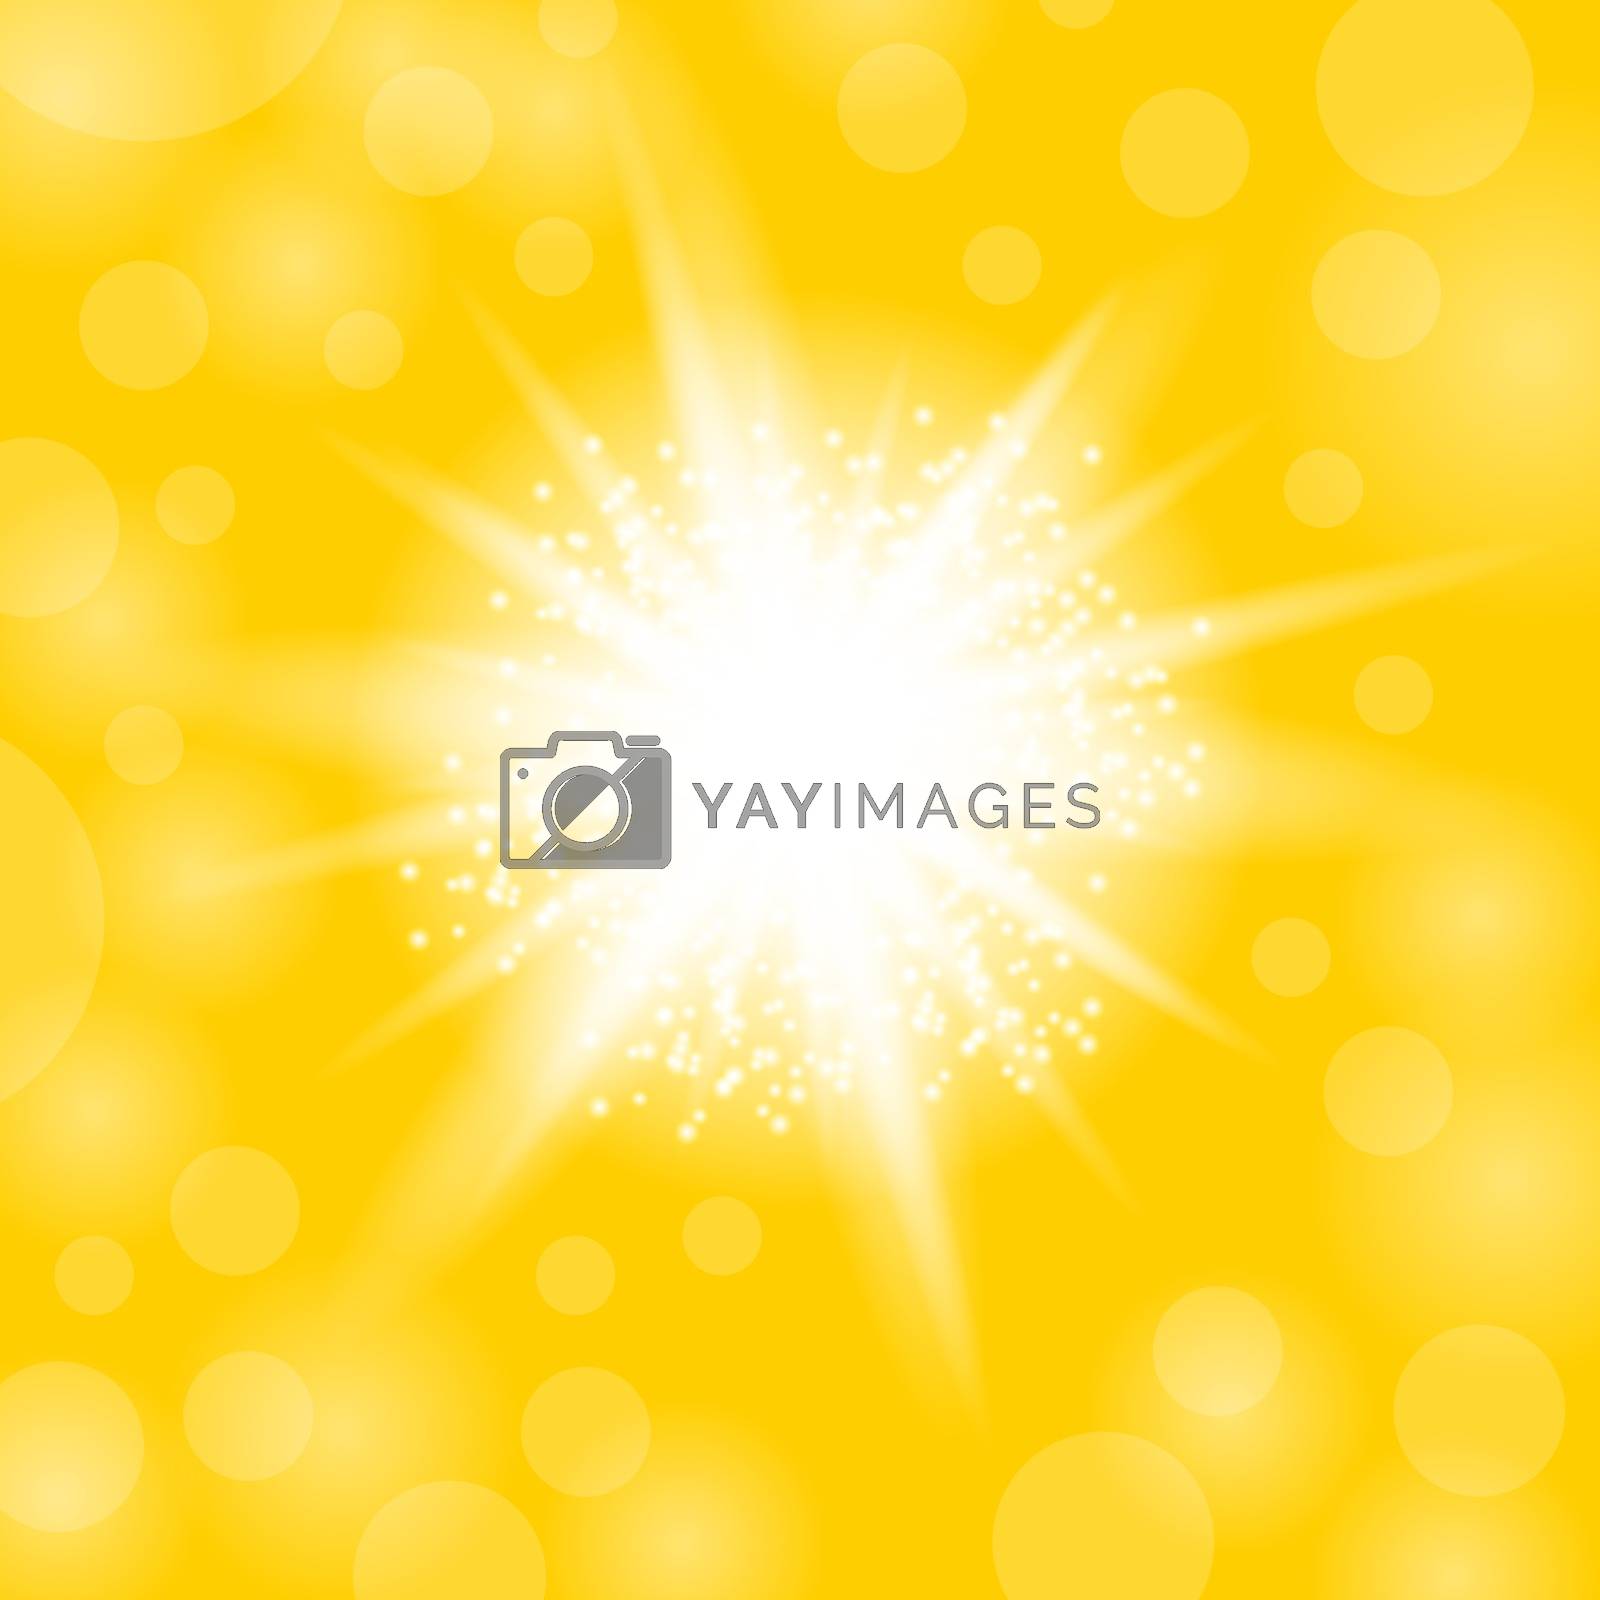 Sparkling Star, Glowing Light Explosion. Starburst with Sparkles on Yellow  Background by valeo5 Vectors & Illustrations with Unlimited Downloads -  Yayimages